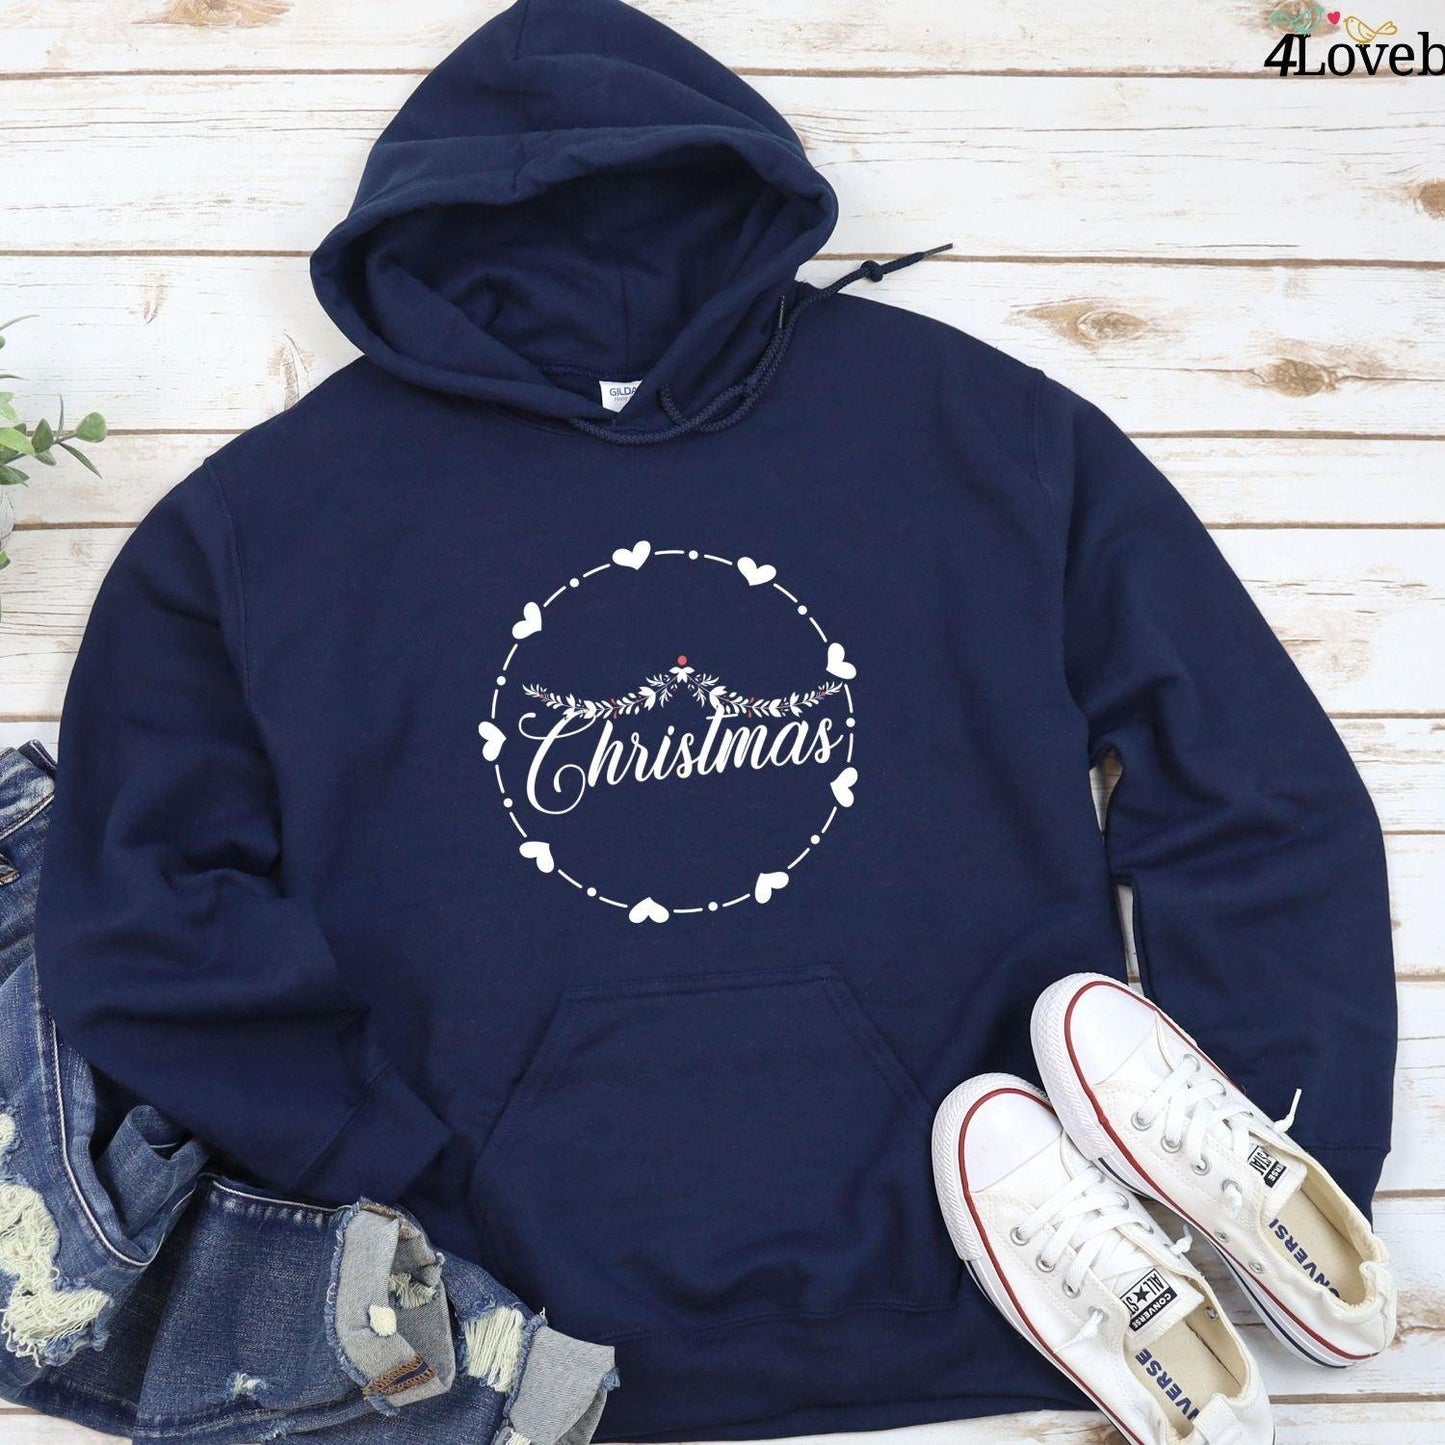 Cozy Matching Set for Couples - Christmas-inspired Pajamas and Stylish Outfits - 4Lovebirds